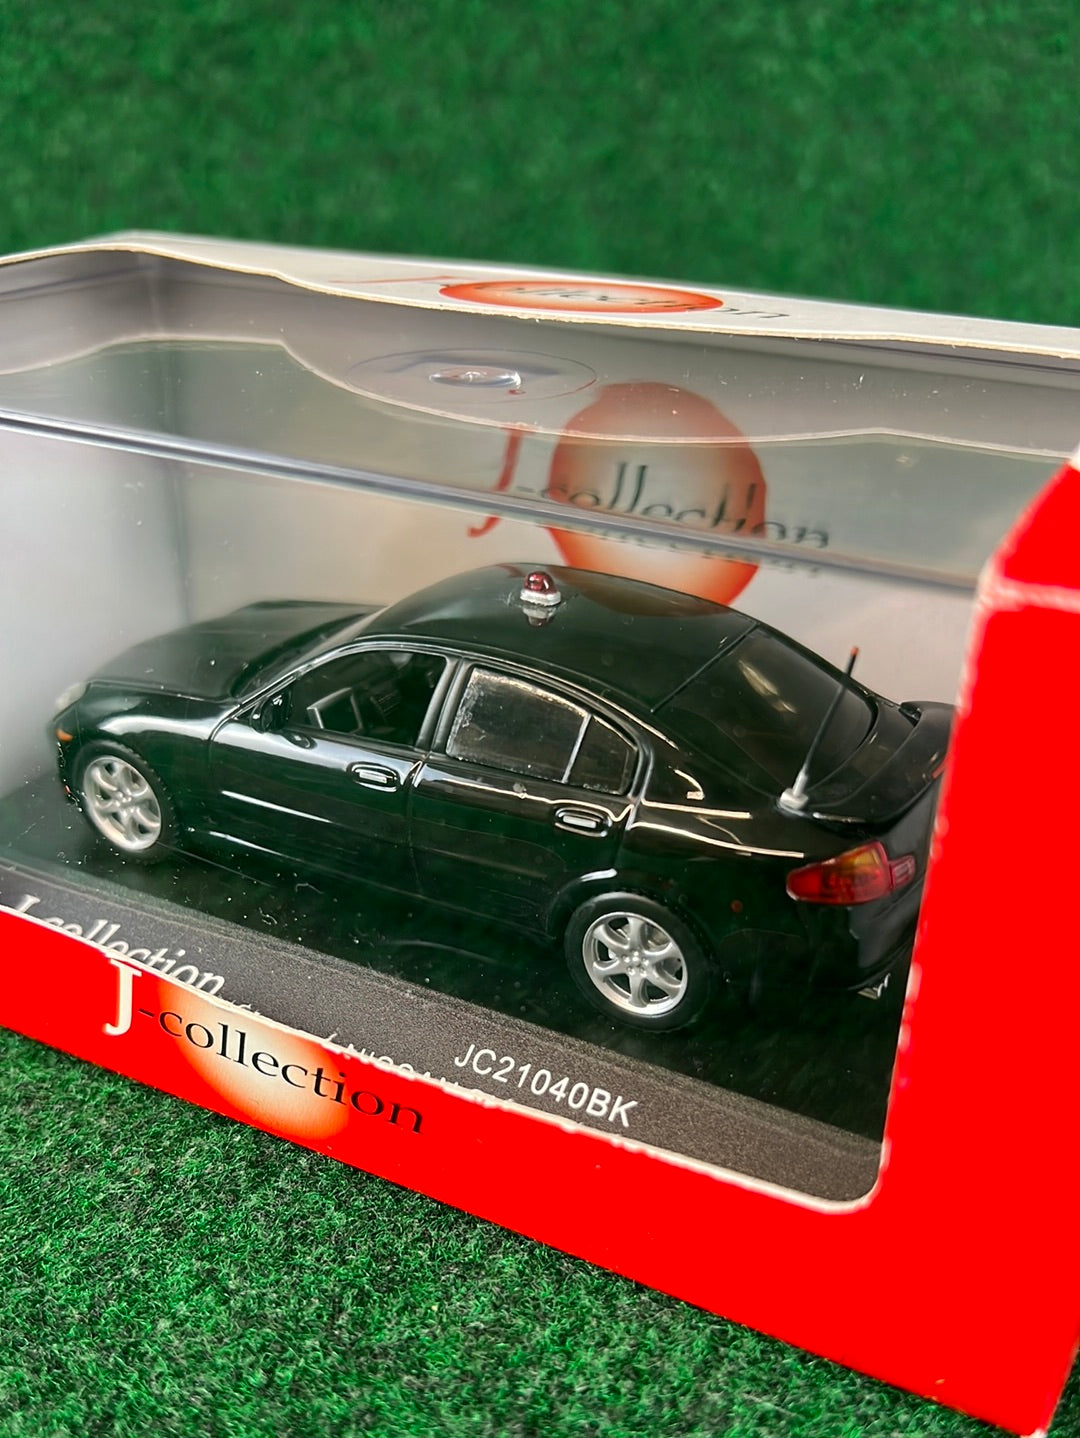 J-Collection (KYOSHO) Nissan Skyline 300GT (Infiniti G35) Modified 1/43 Scale Diecast